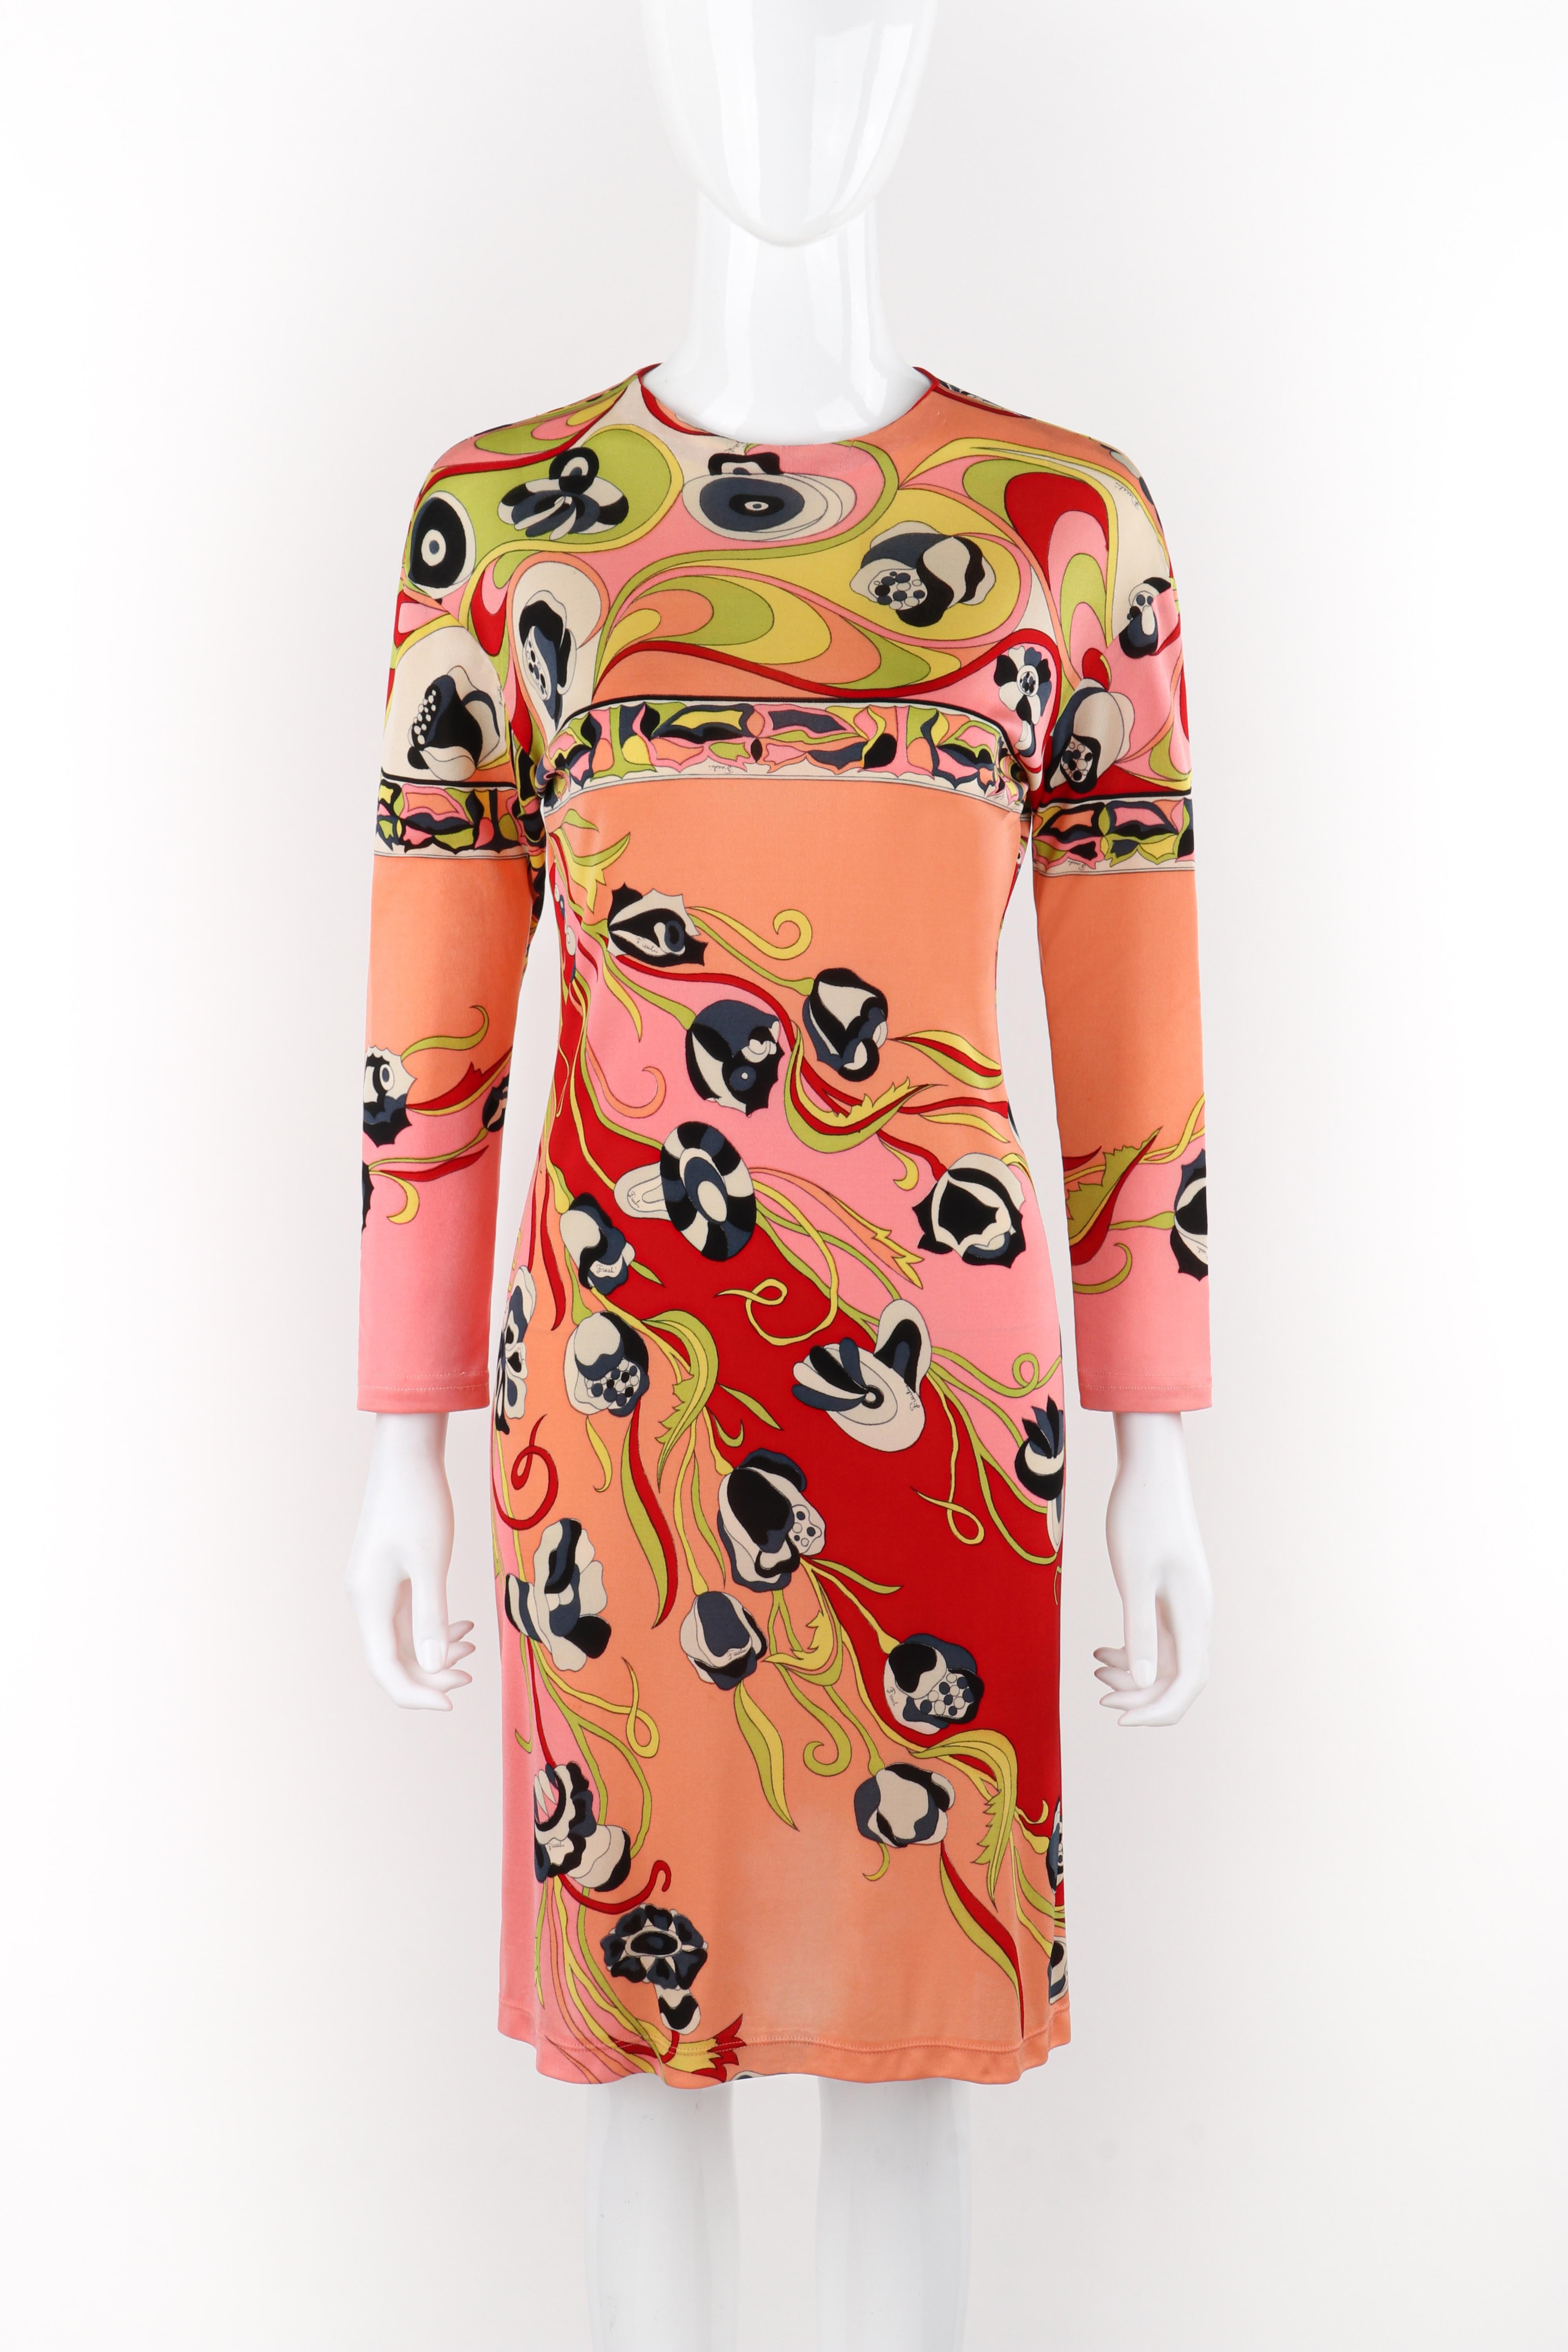 Brand / Manufacturer: Emilio Pucci
Circa: 1970s
Designer: Emilio Pucci
Style: Knee-length dress
Color(s): Shades of pink, red, green, yellow, gray, black, white
Lined: No 
Unmarked Fabric Content (feel of): Silk (primary fabric)
Additional Details /